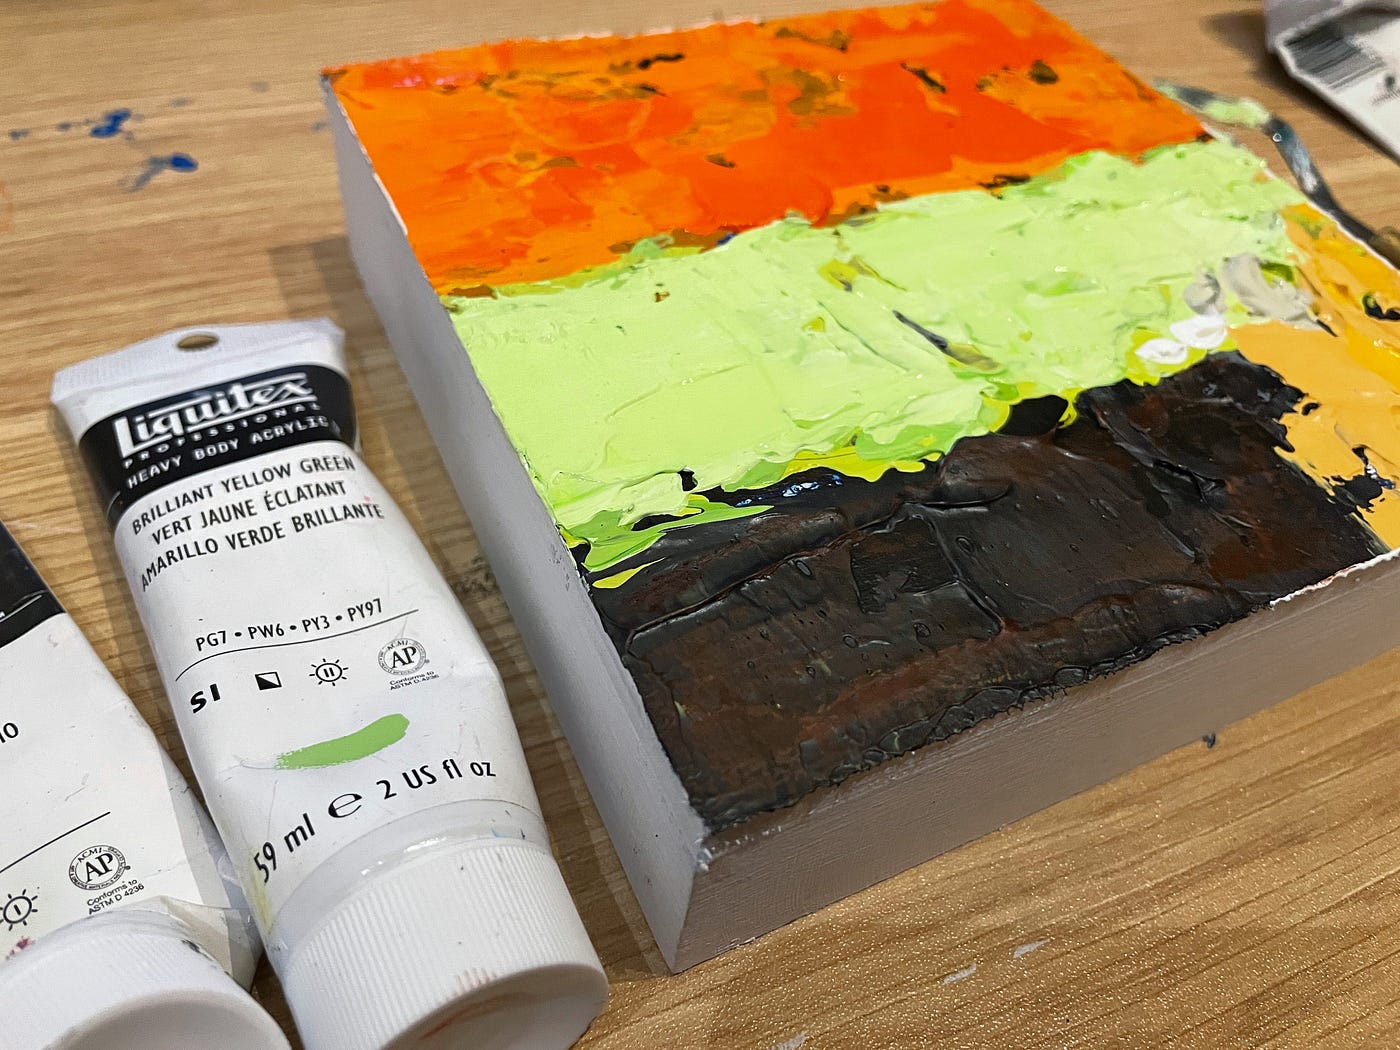 PAINTING TUTORIAL ON GESSO BOARD